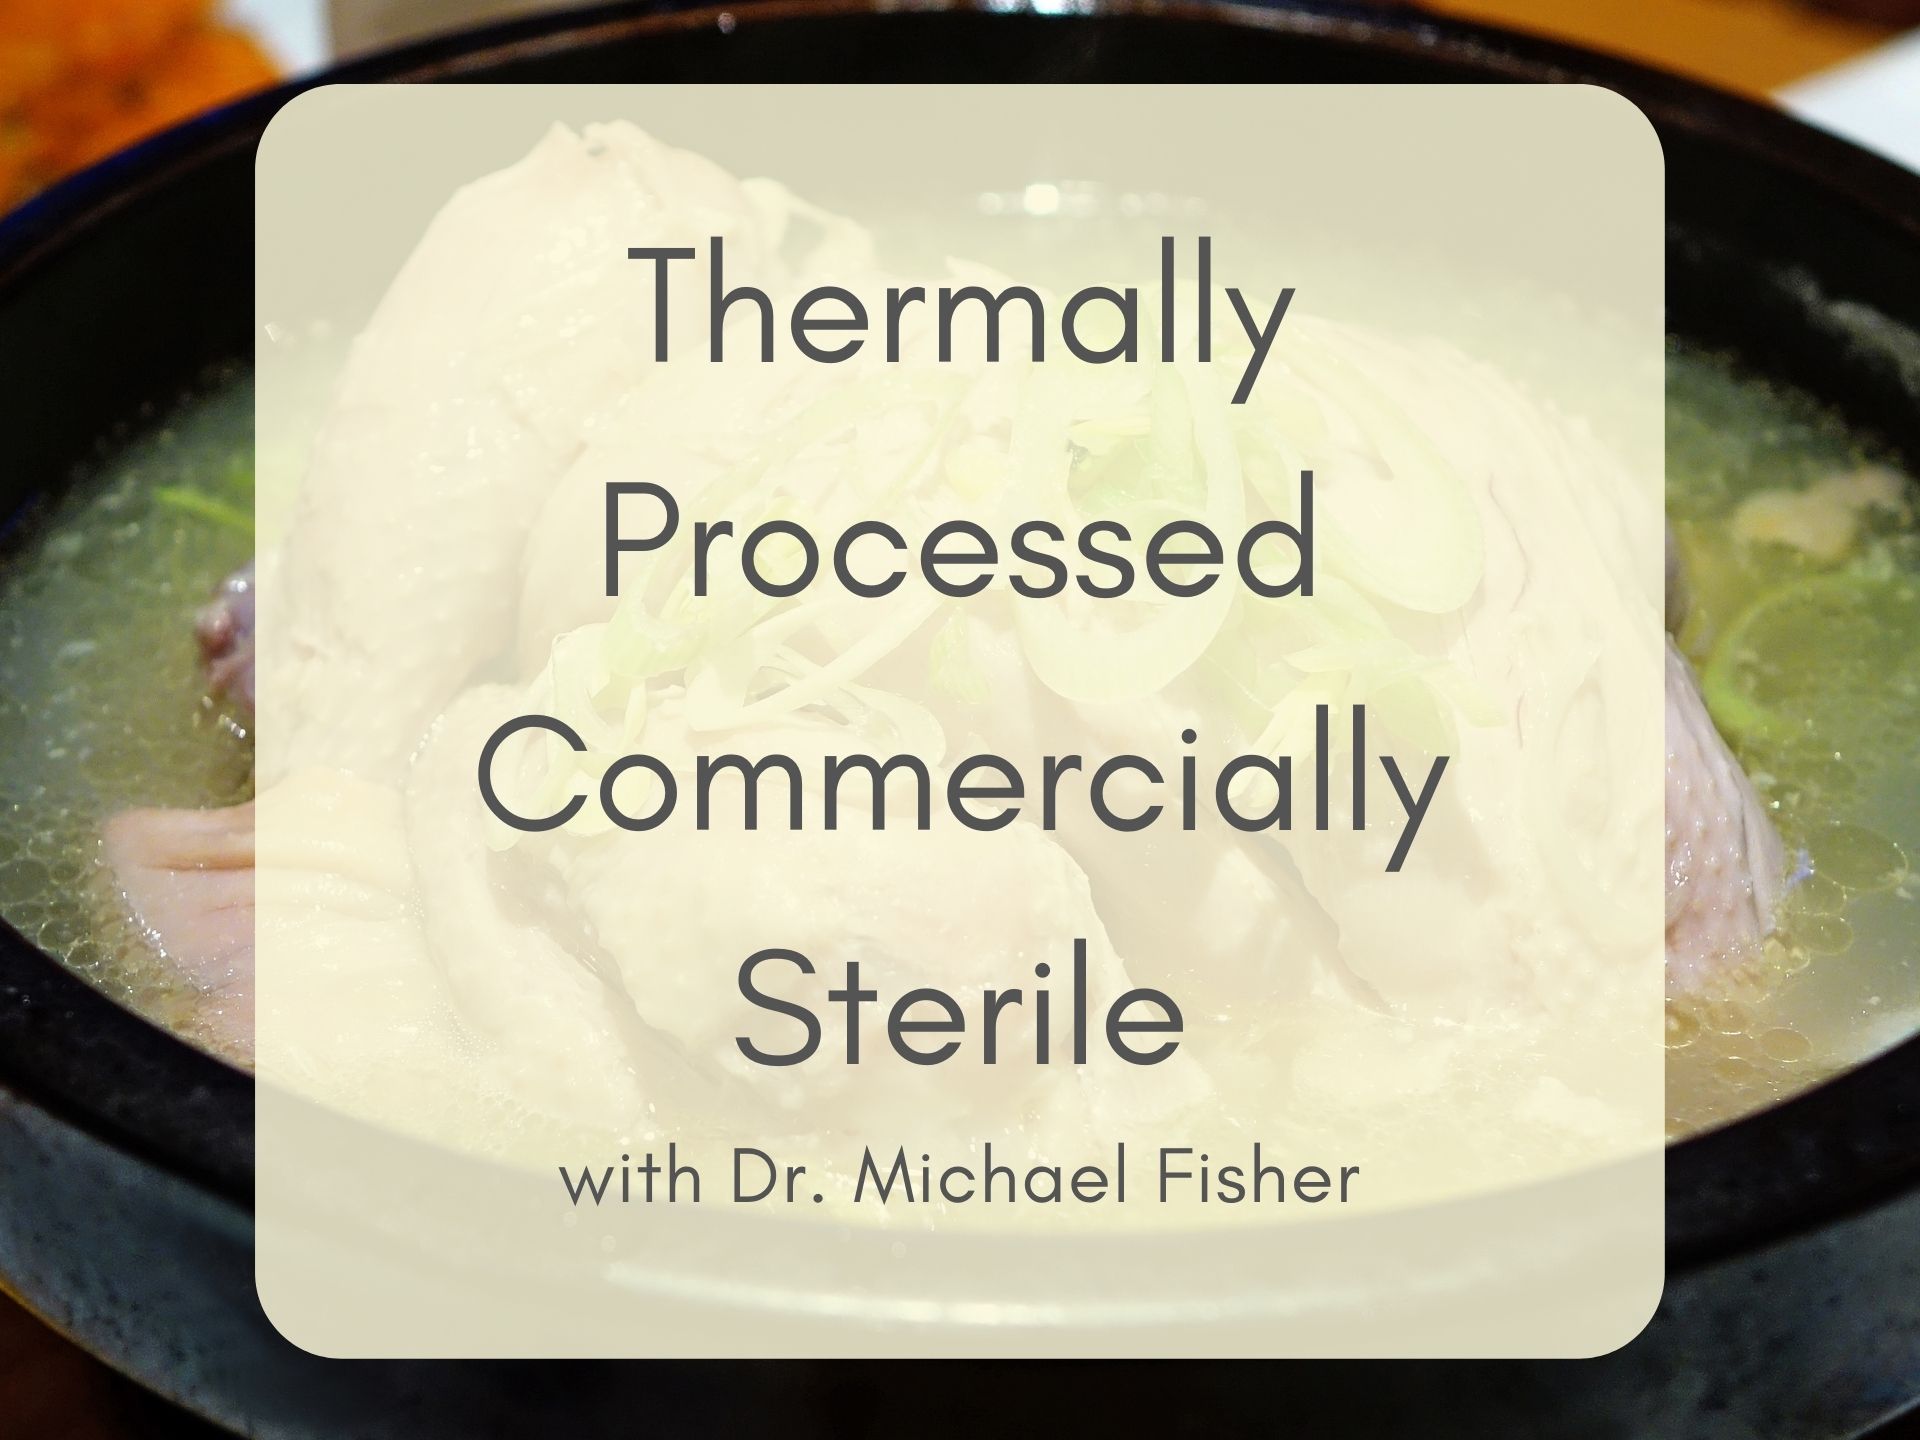 Thermally Processed, Commercially Sterile